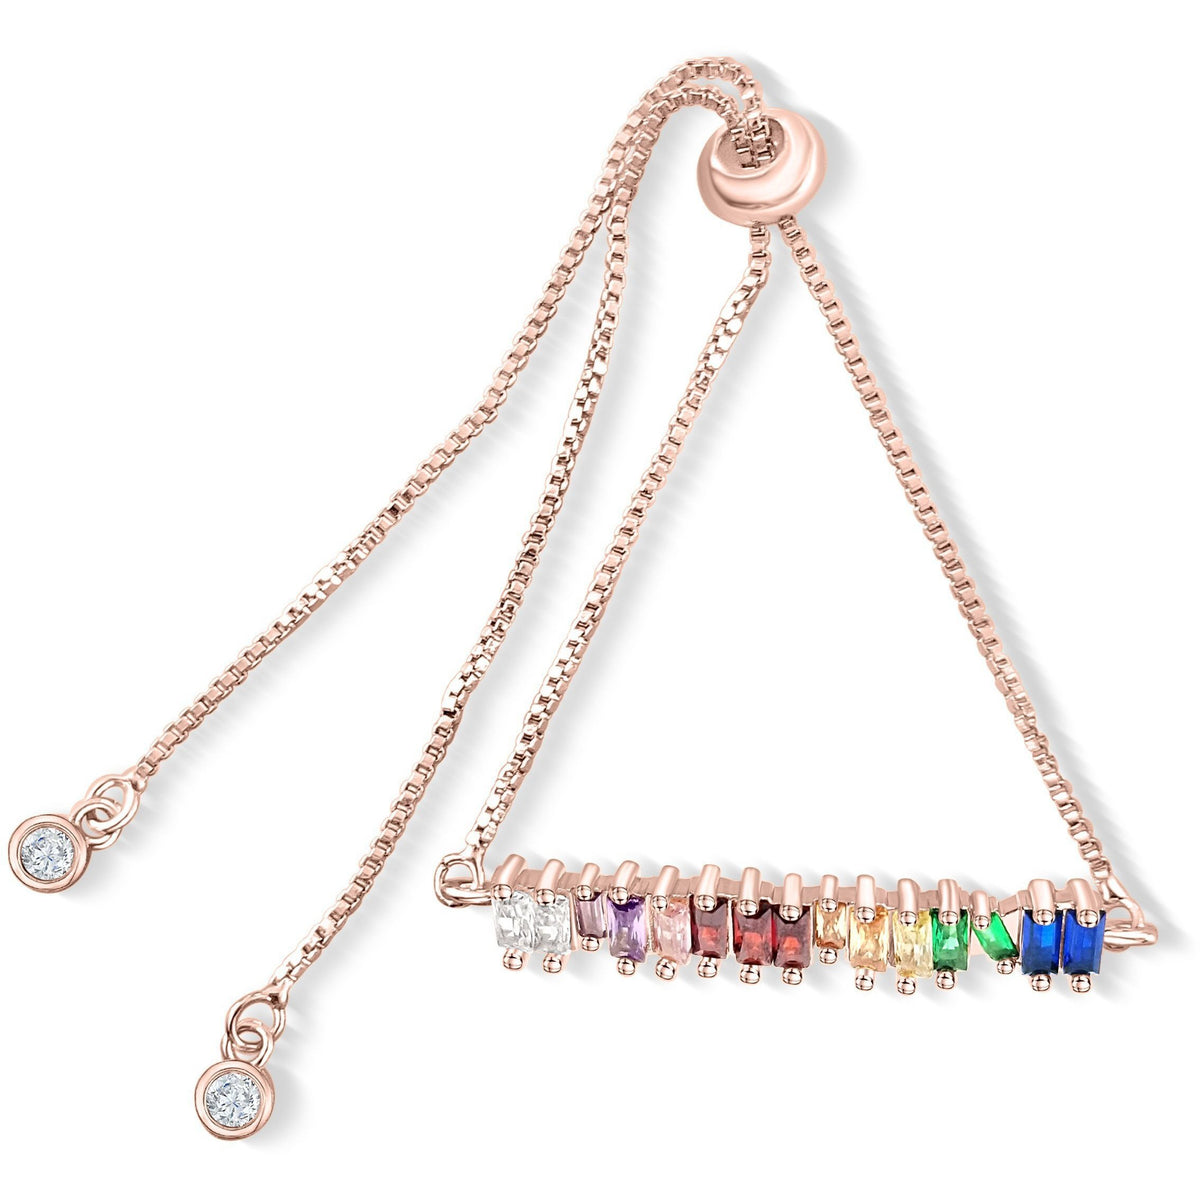 CHARMING WHIMSY NECKLACE - Beyond The Rainbow